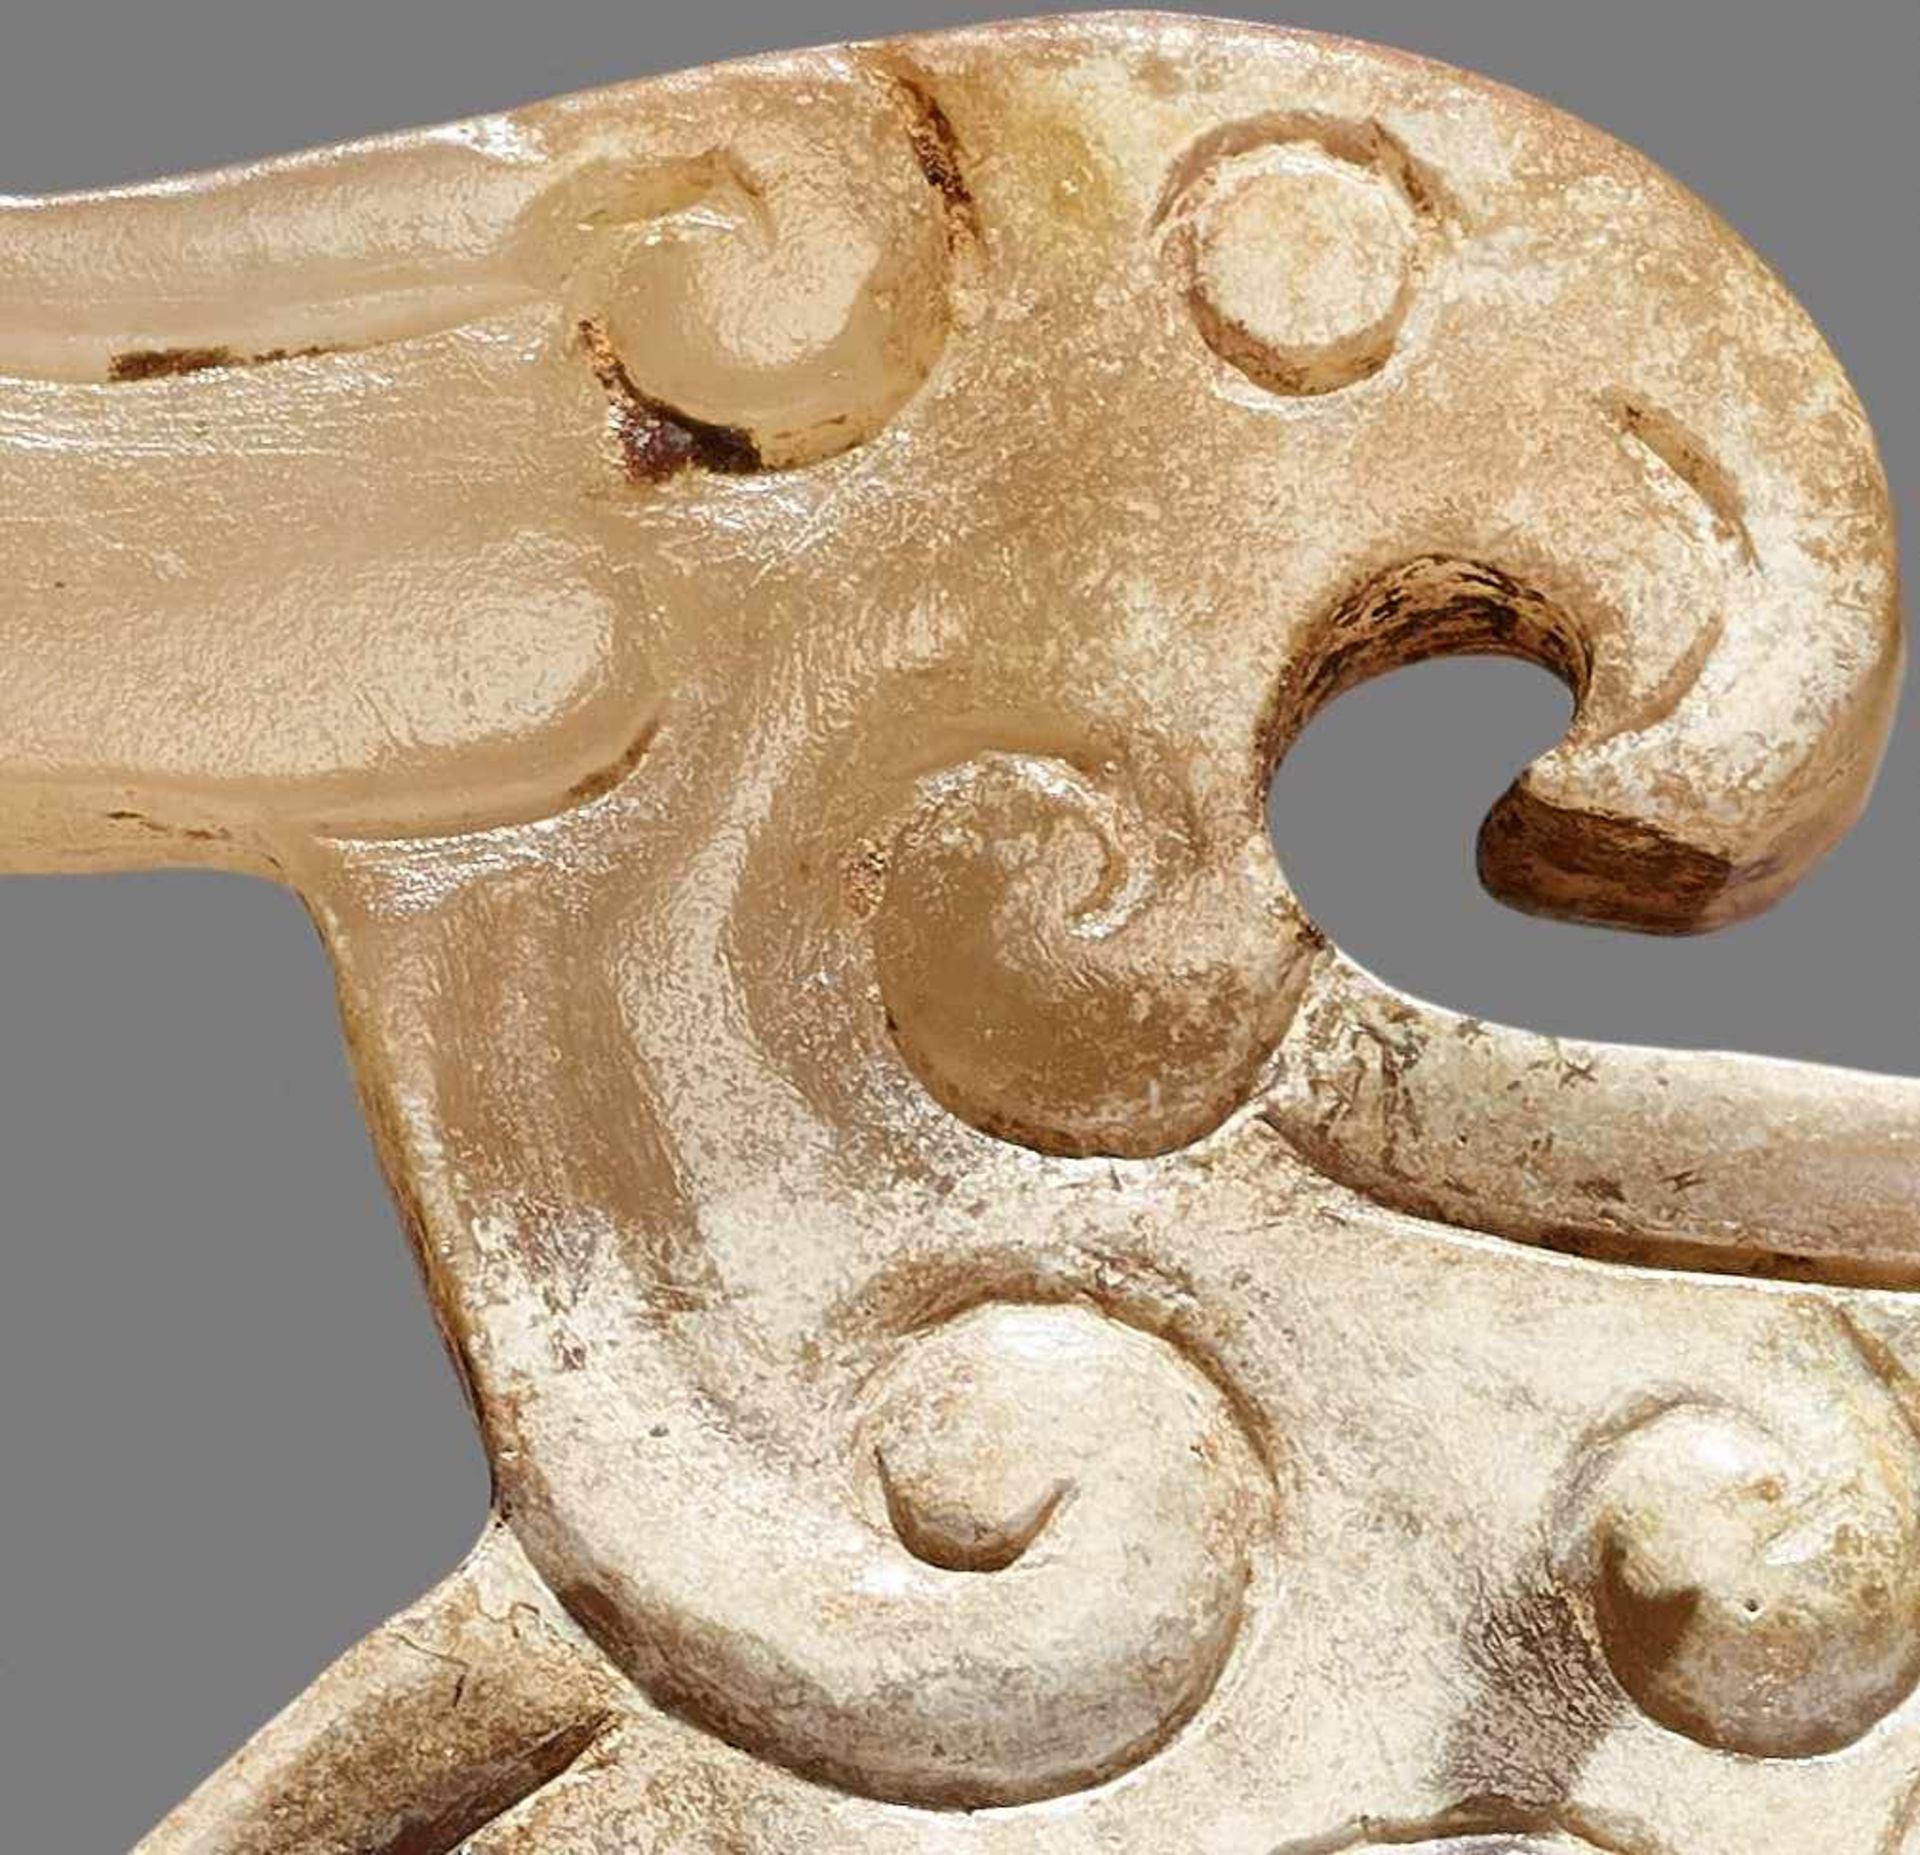 A SINUOUS S-SHAPED DRAGON WITH A PHOENIX AND CURLED APPENDAGES Jade, China. Eastern Zhou, 5th - - Image 6 of 6